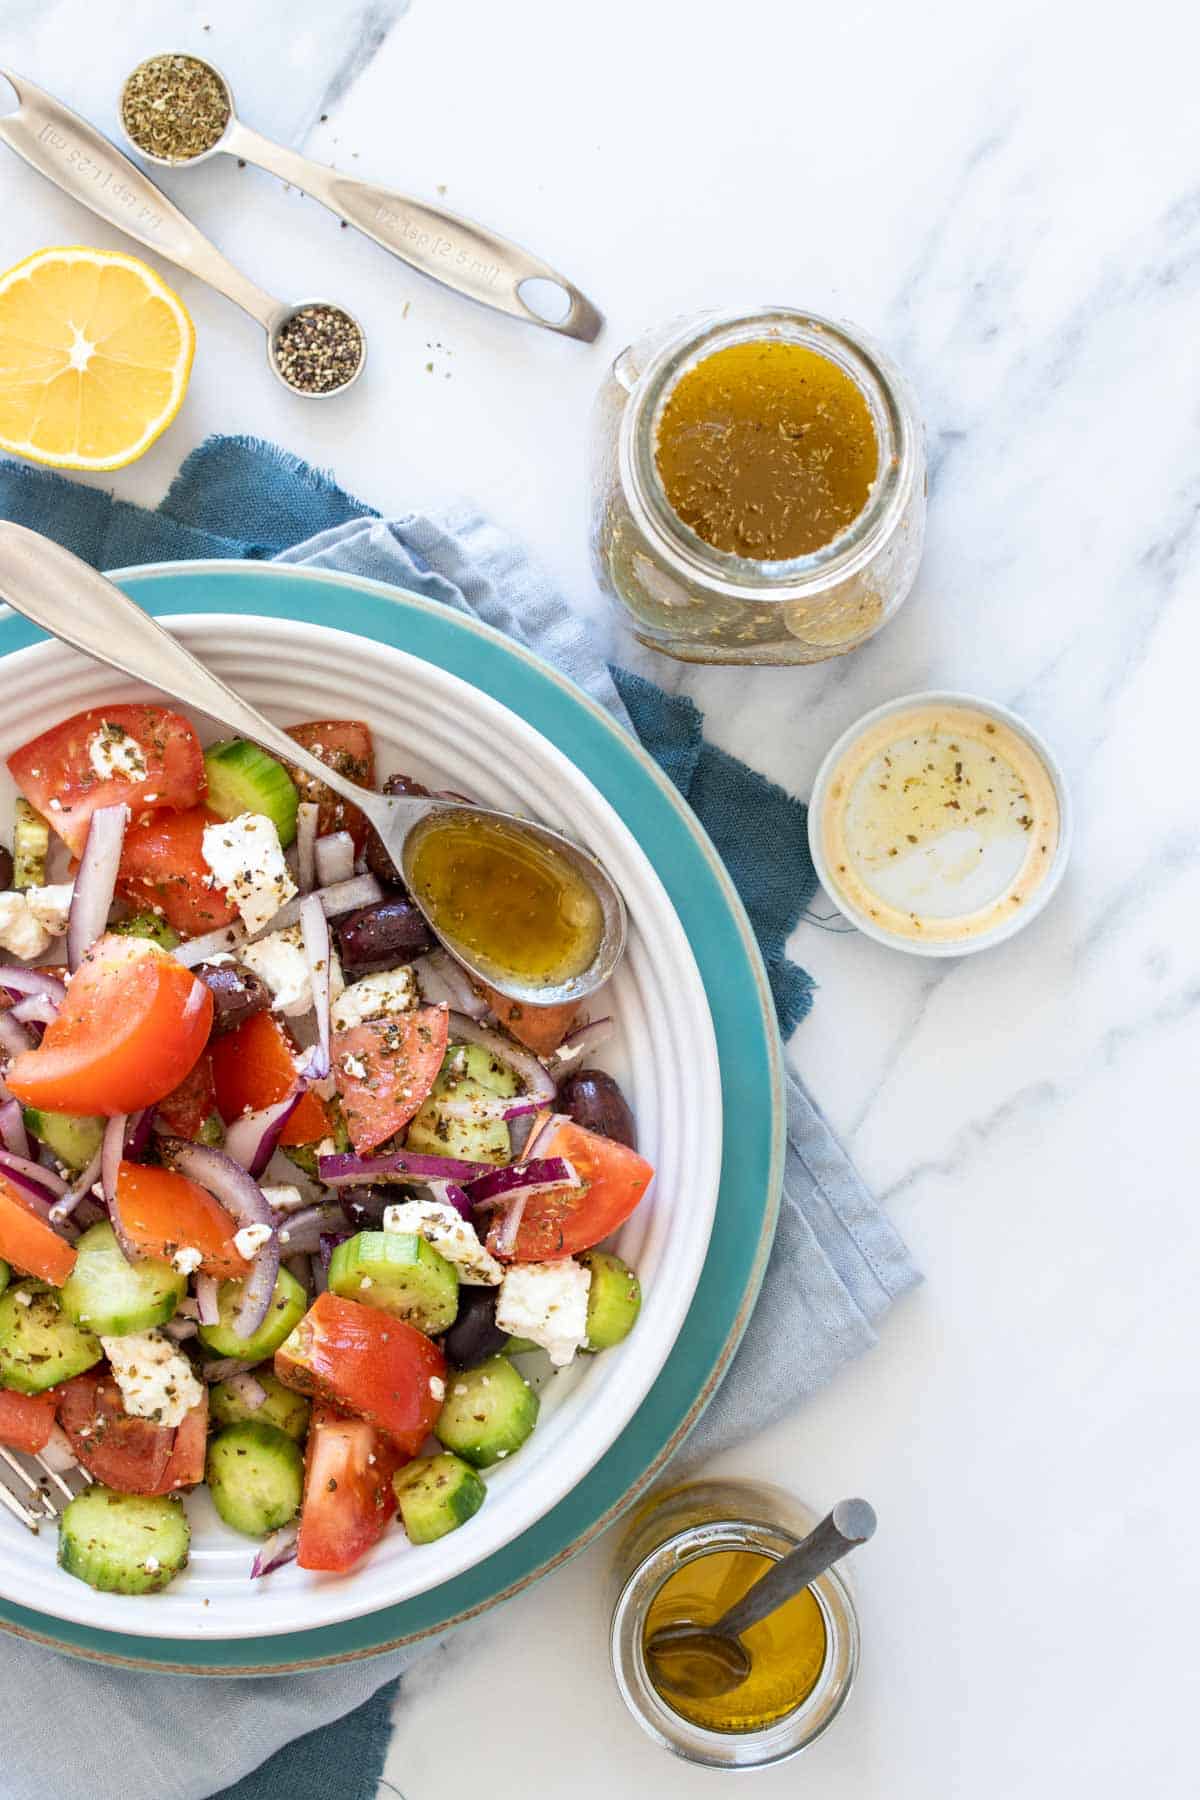 Top view of a Greek salad next to a jar of dressing with a spoon with dressing in it sitting on the plate